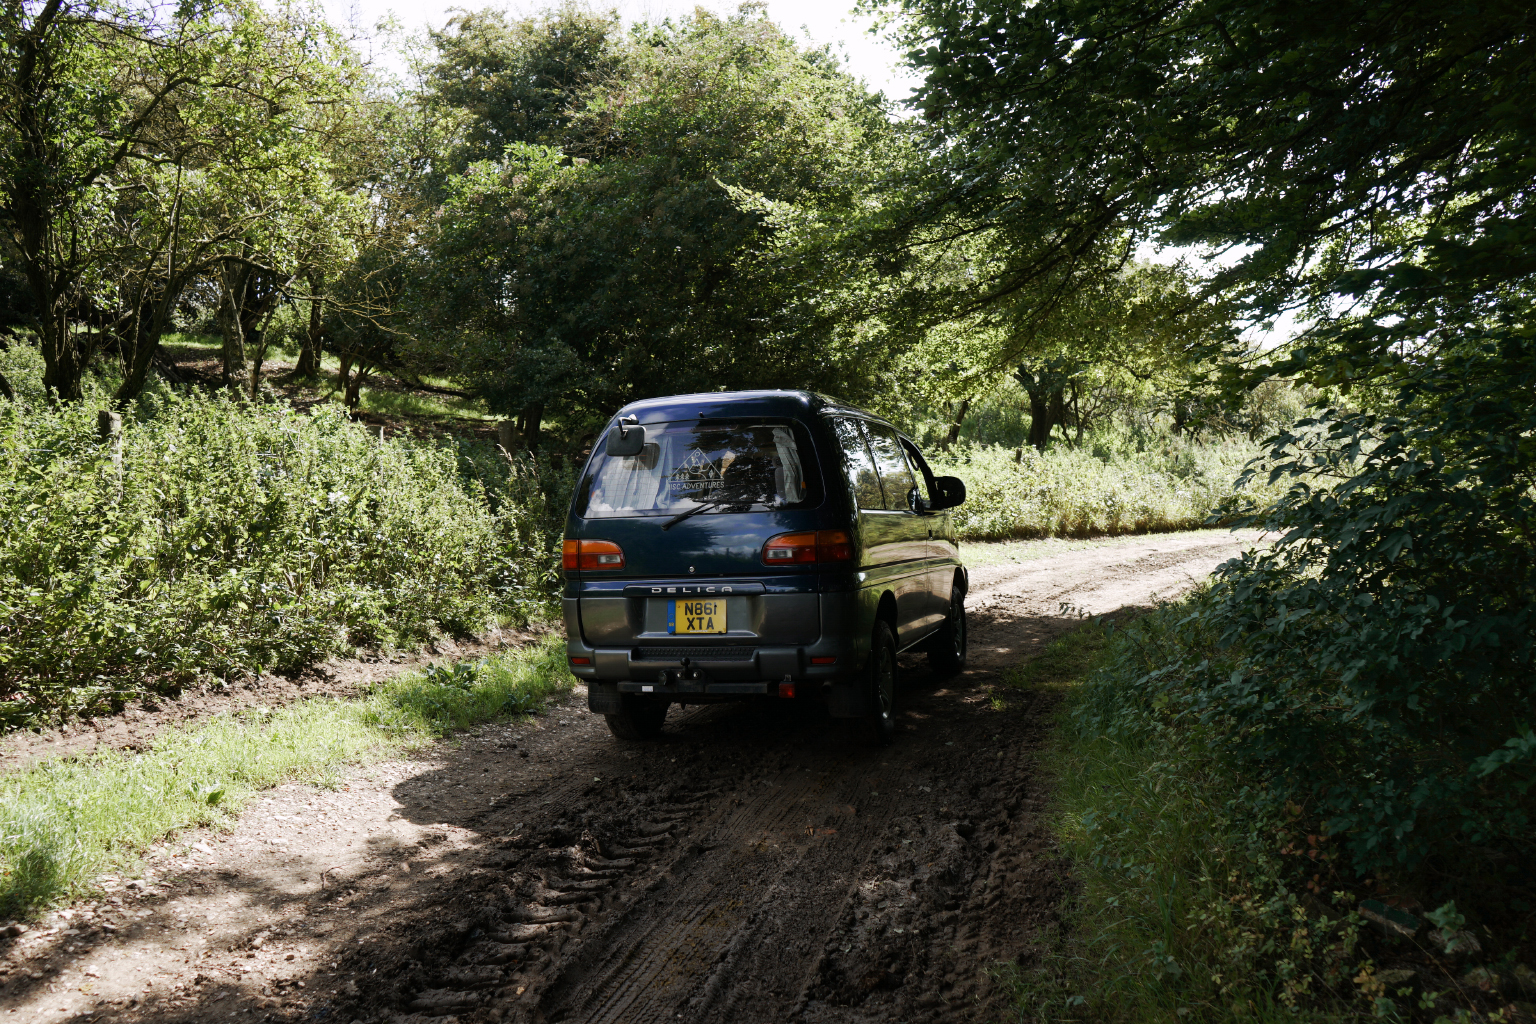  Little bit of off-roading to test it all works... 